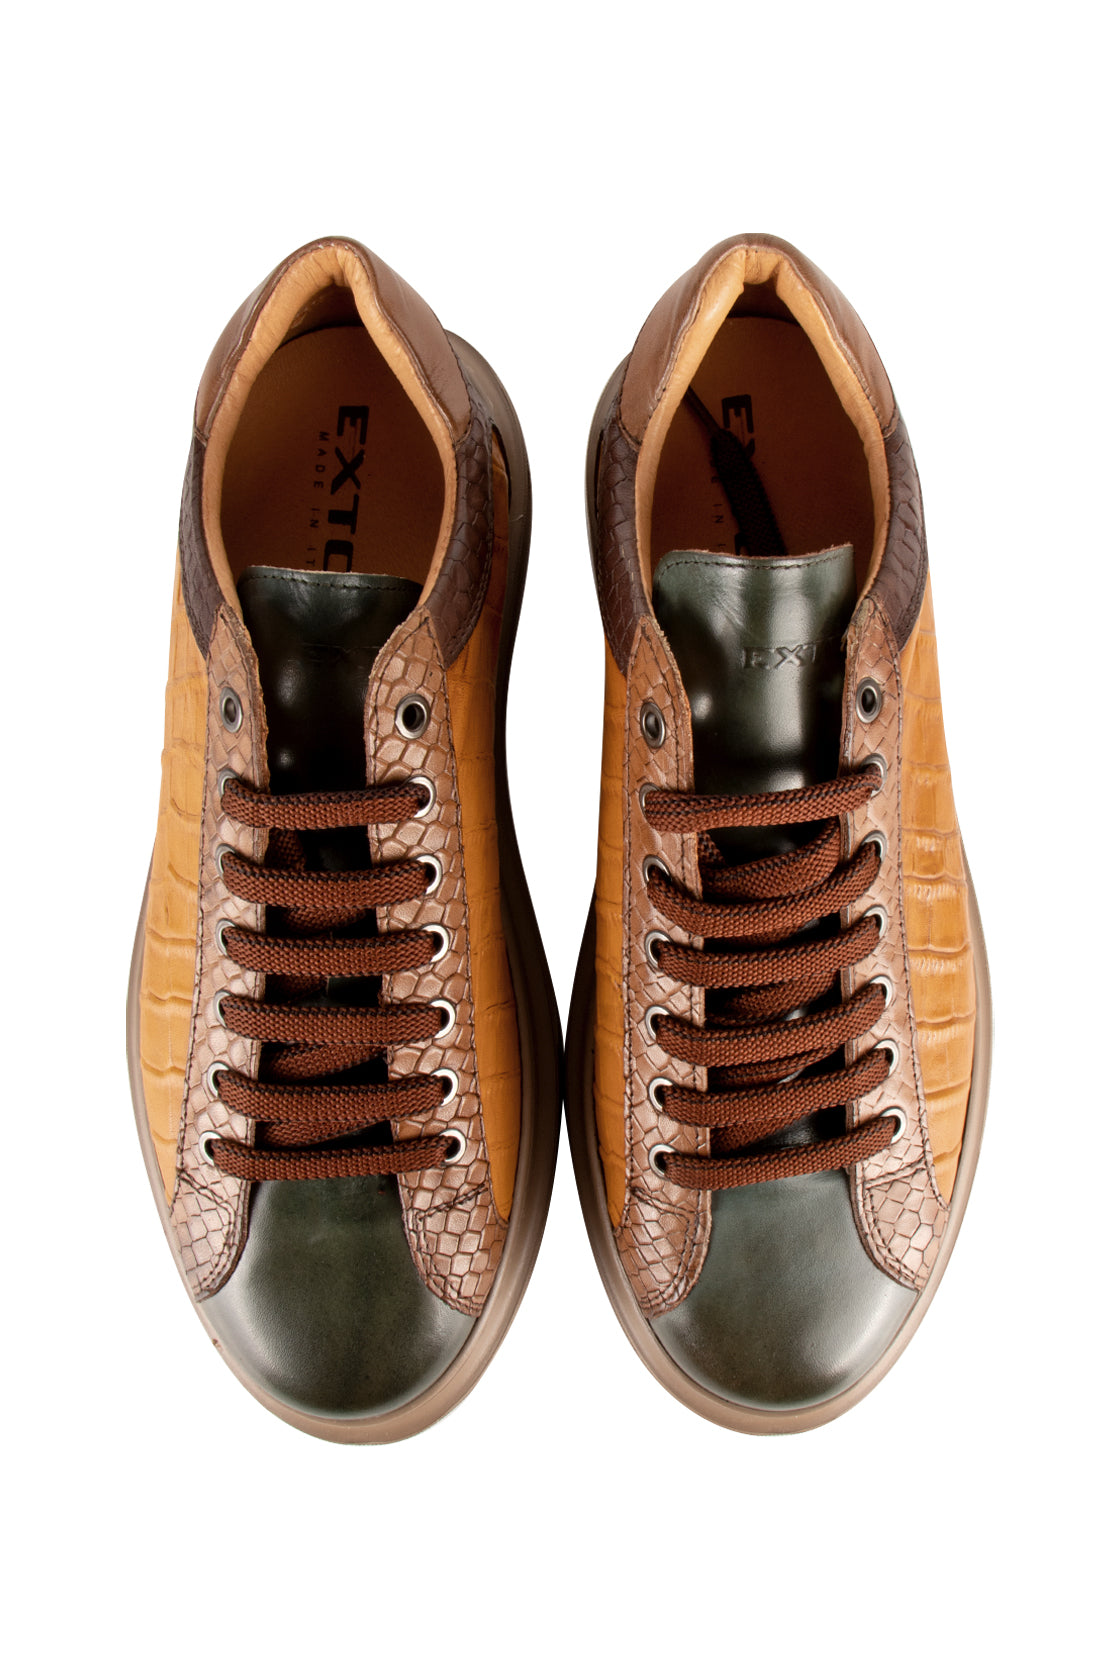 Exton Leather Trainer Tan/Brown